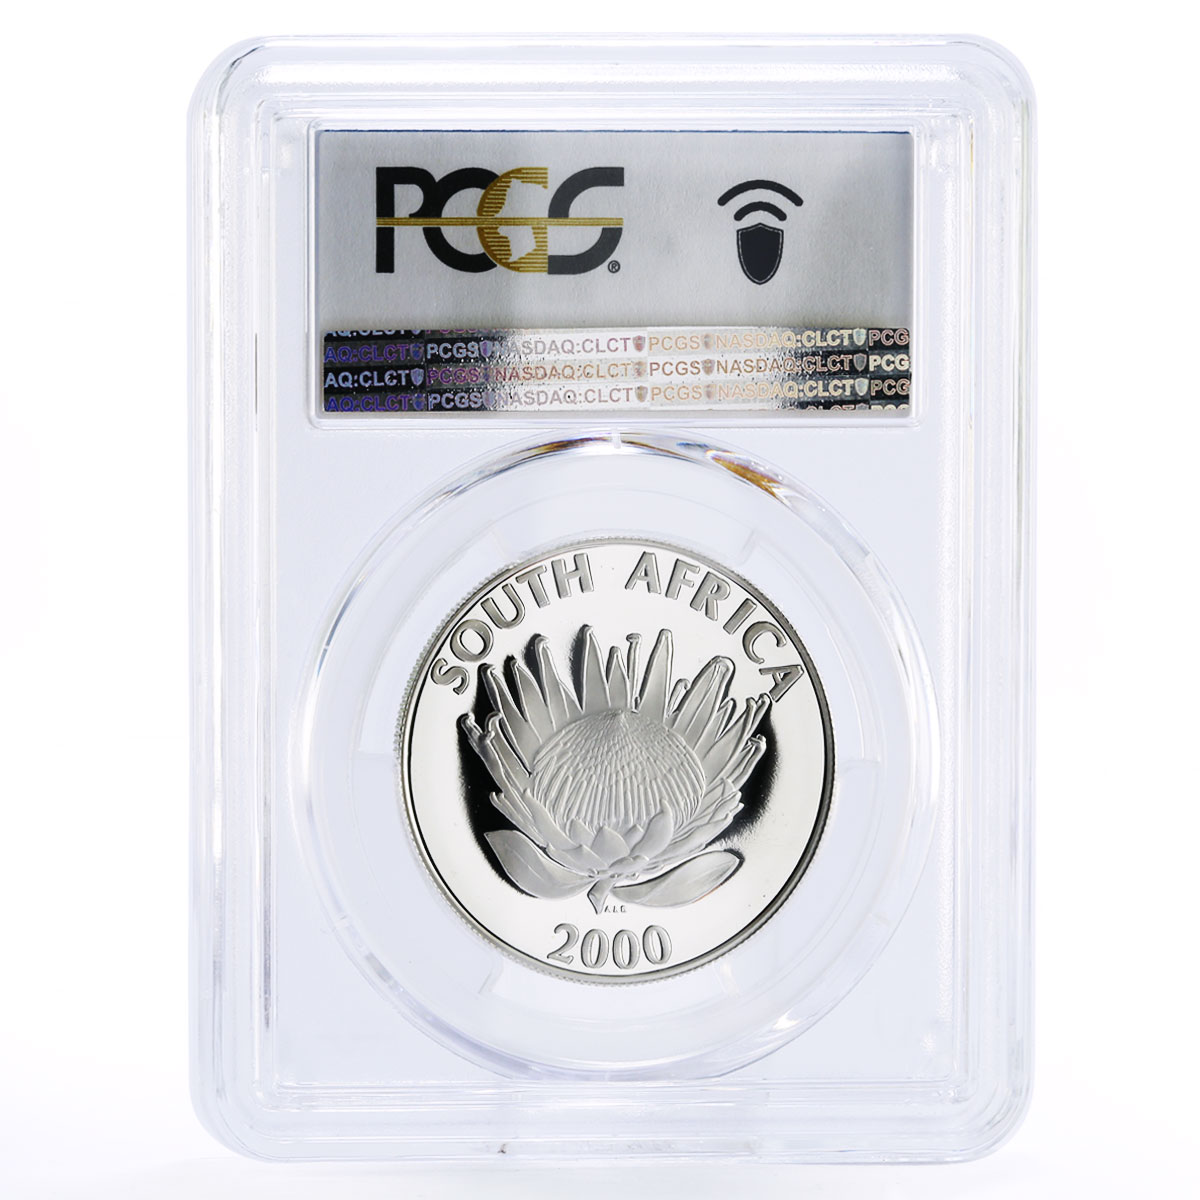 South Africa 1 rand National Wine Industry Barrels PR70 PCGS silver coin 2000